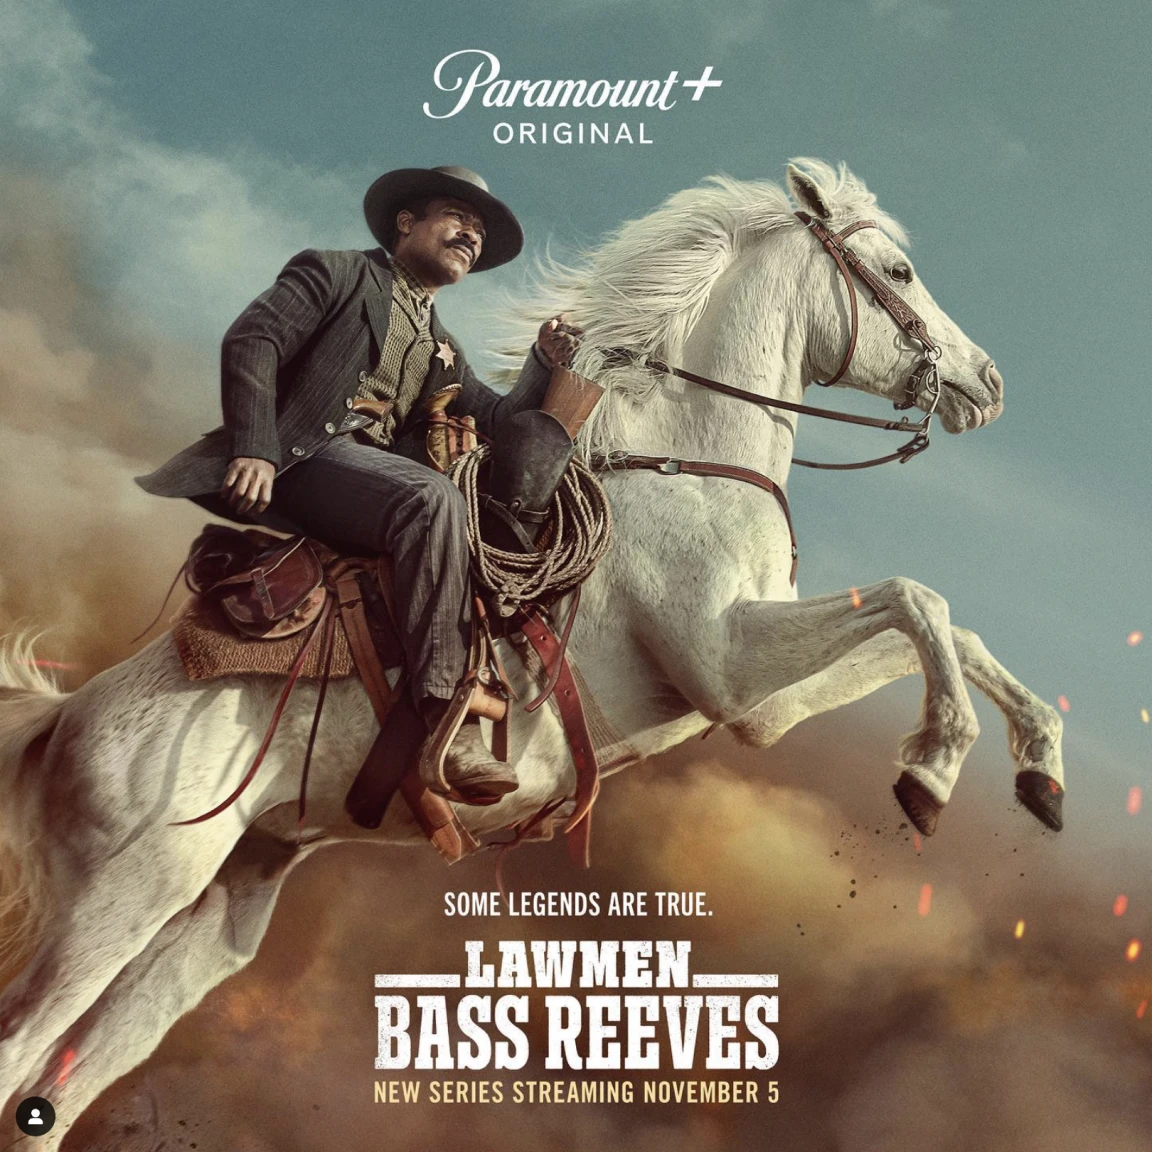 Key art for Bass Reeves riding a rearing white horse by Paramount+